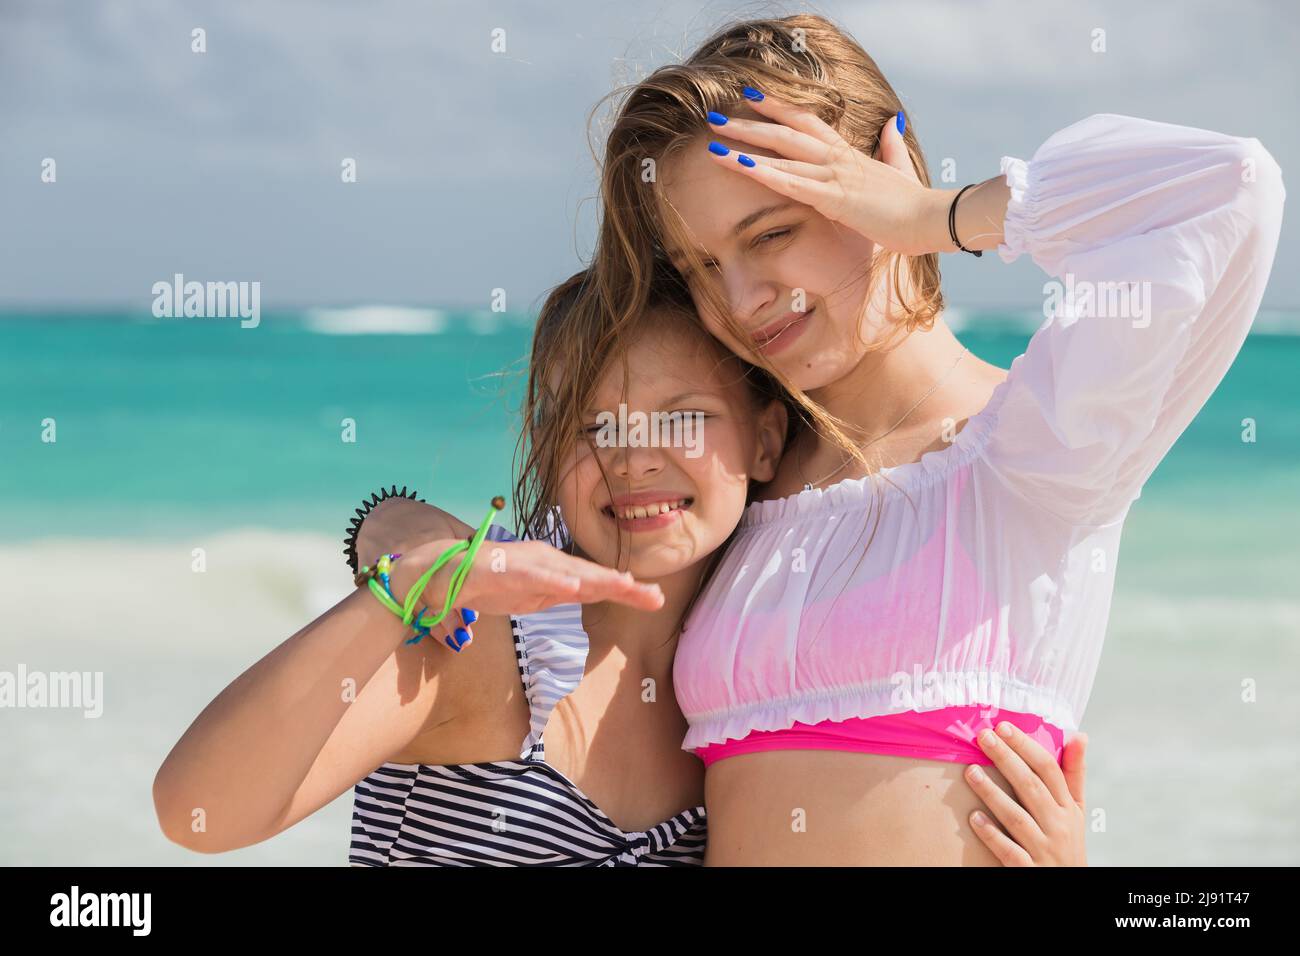 Real sisters are on the vacation, outdoor portrait of two beautiful European girls taken at the ocean coast on a sunny day Stock Photo